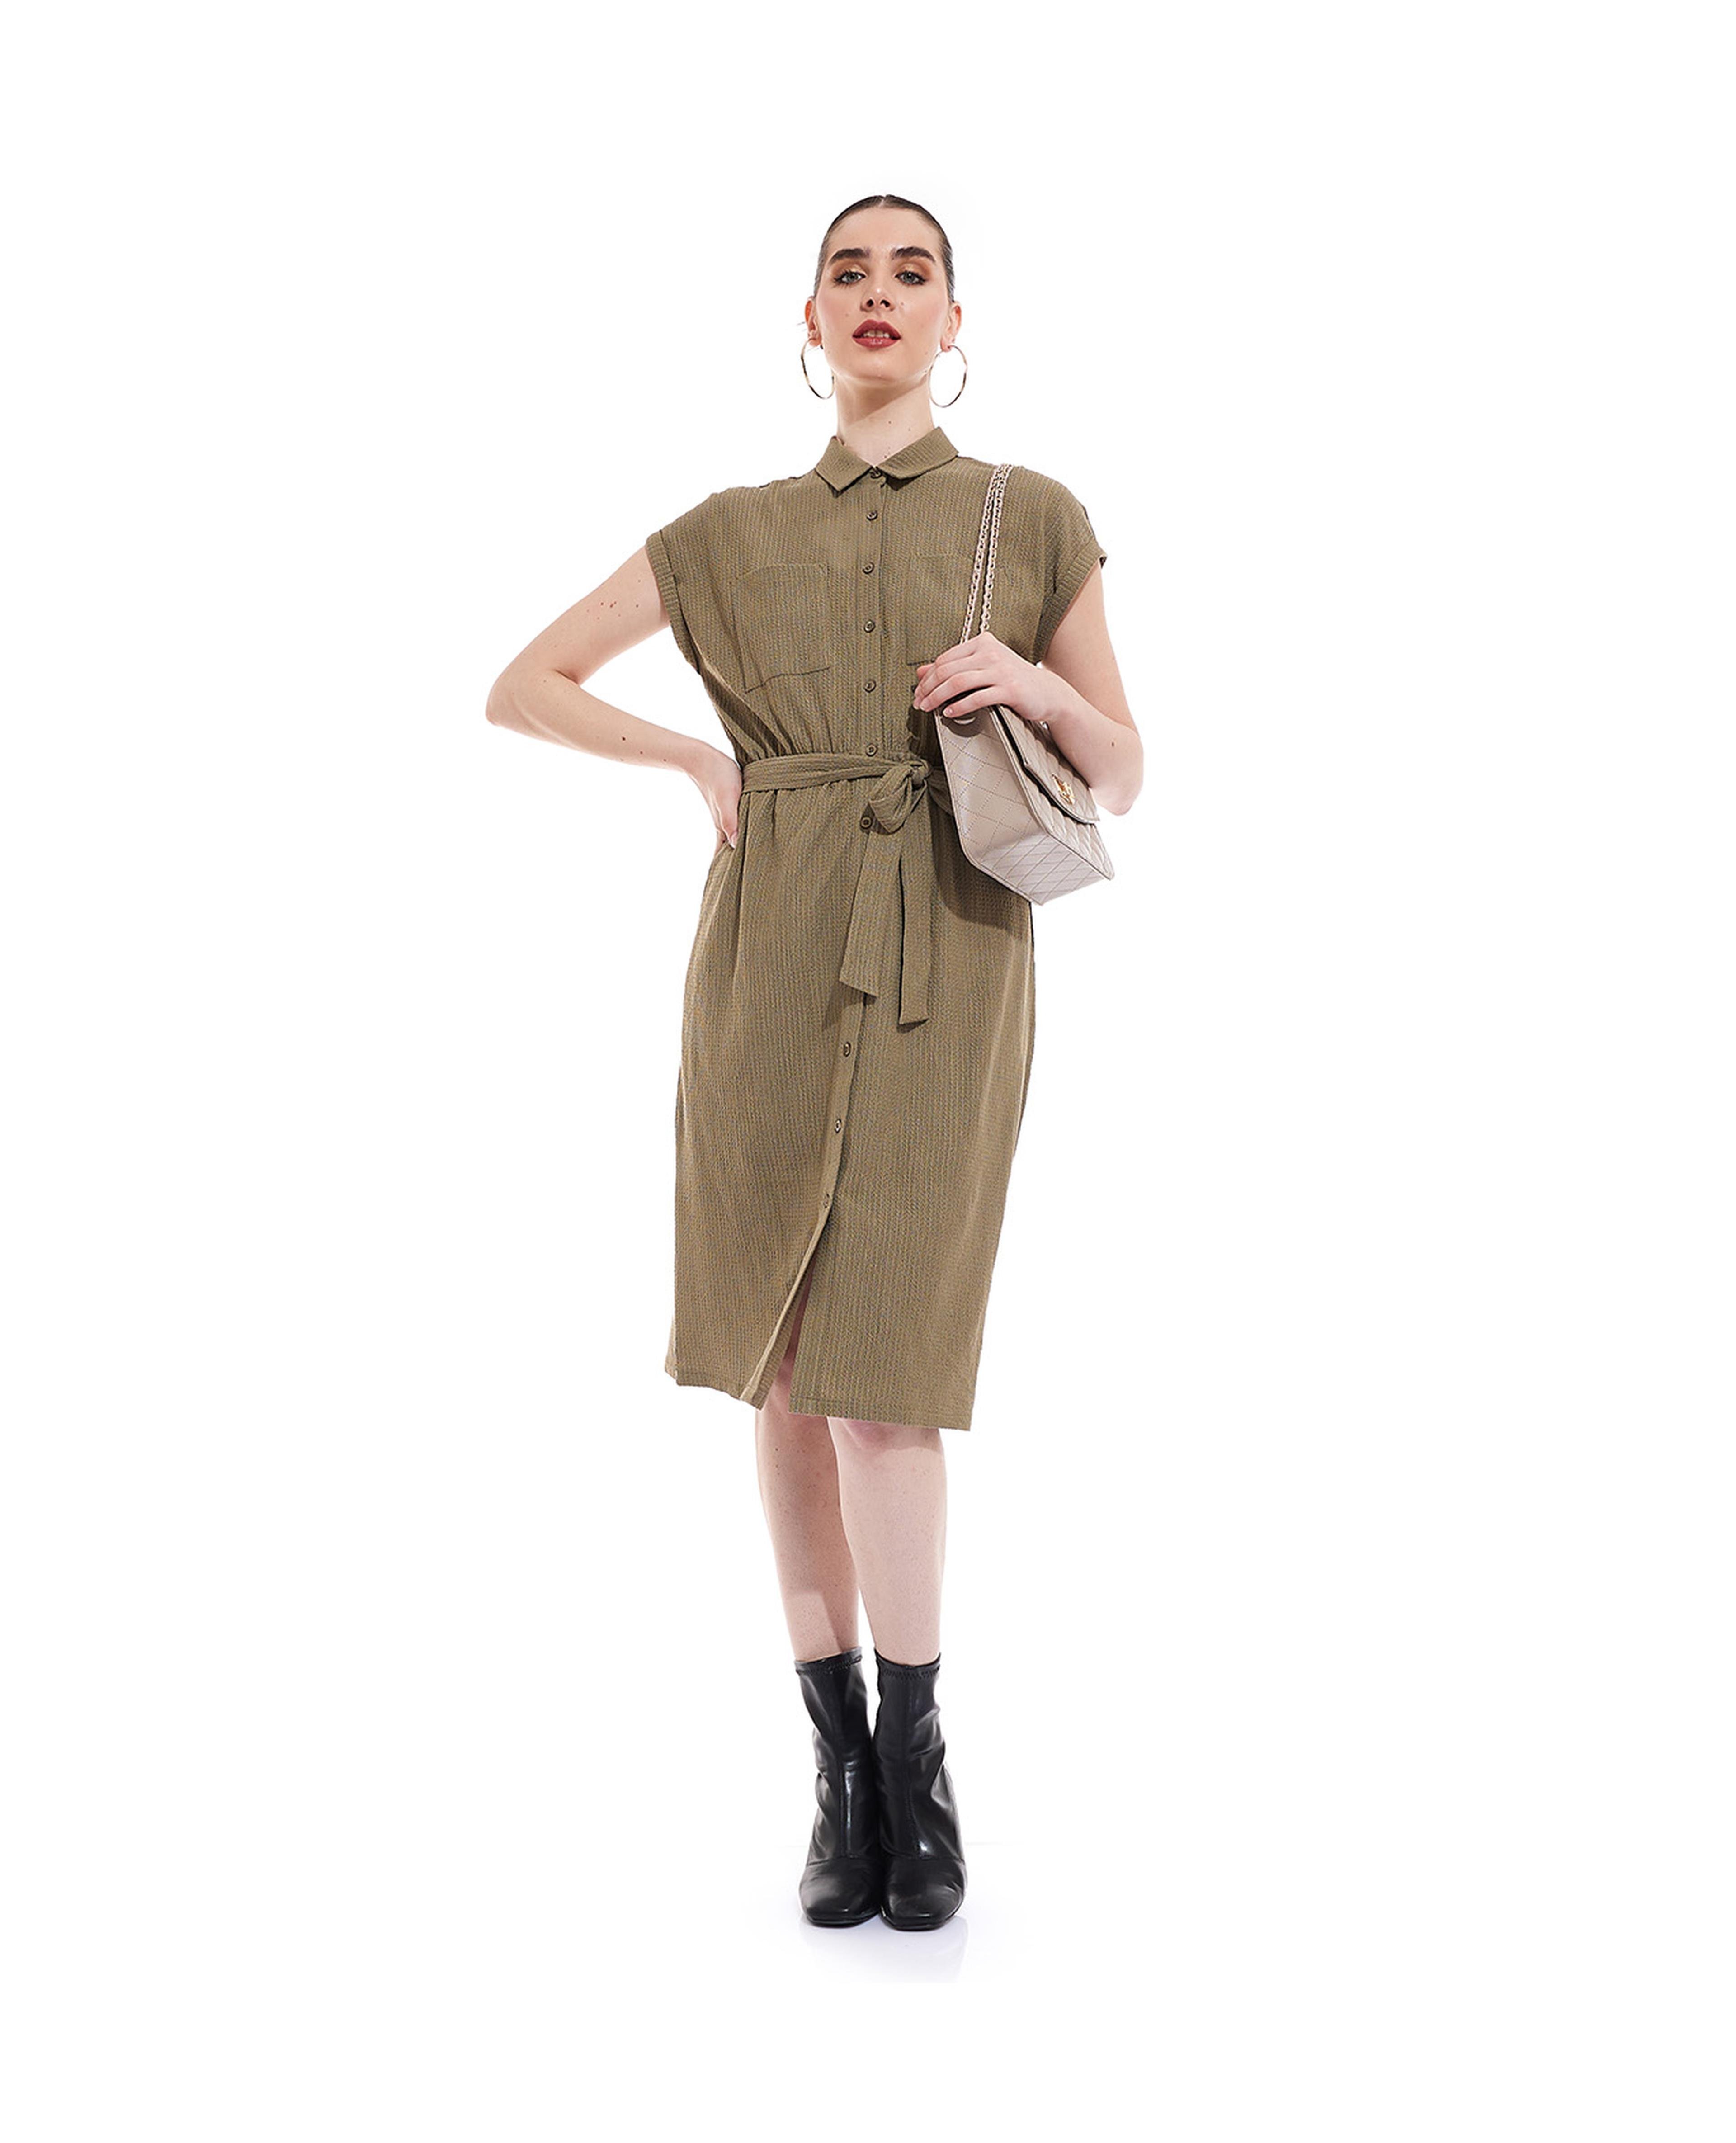 Belted Shirt Dress with Short Sleeves